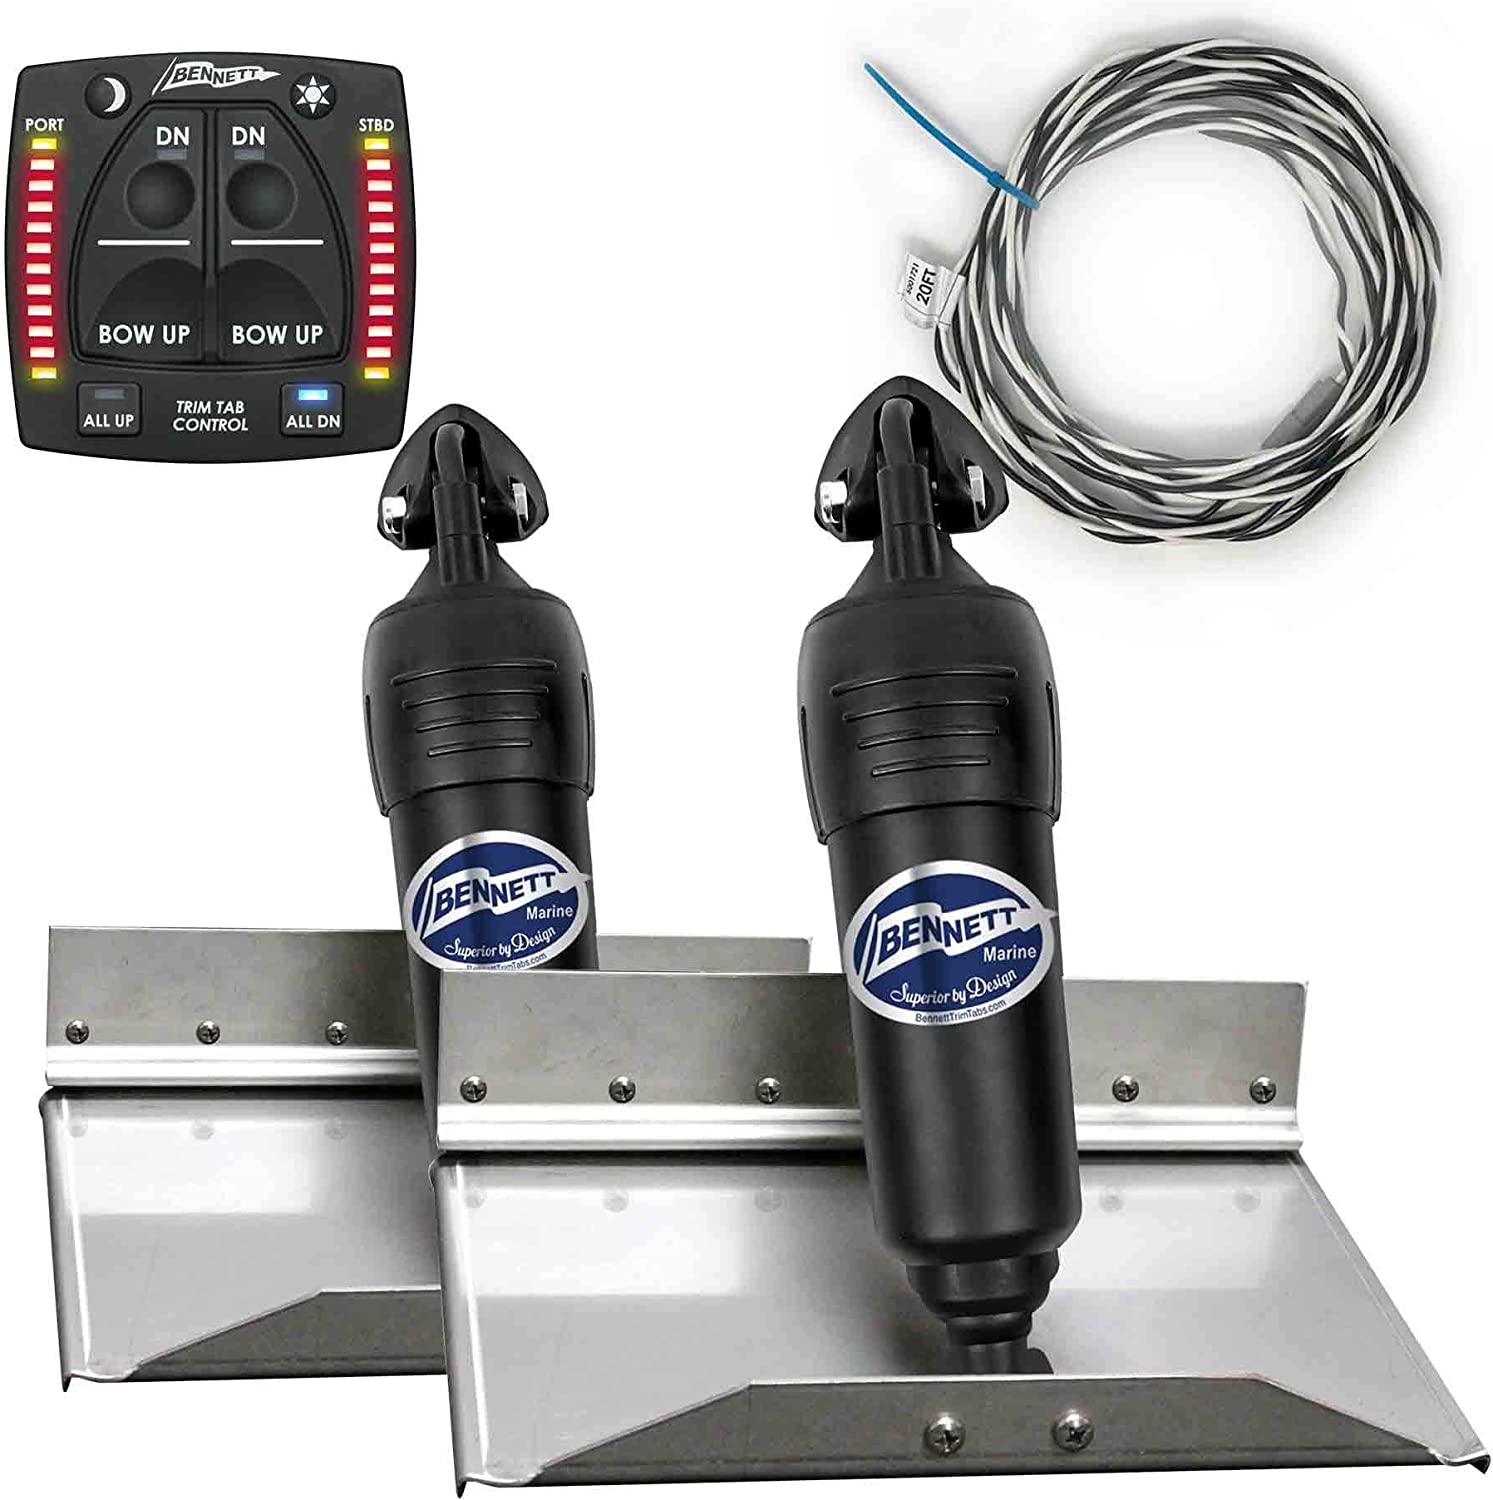 Bennett Complete Kit BOLT Electric Trim Tab with 2020 Integrated Helm Control, 12x9 inches-Canadian Marine &amp; Outdoor Equipment